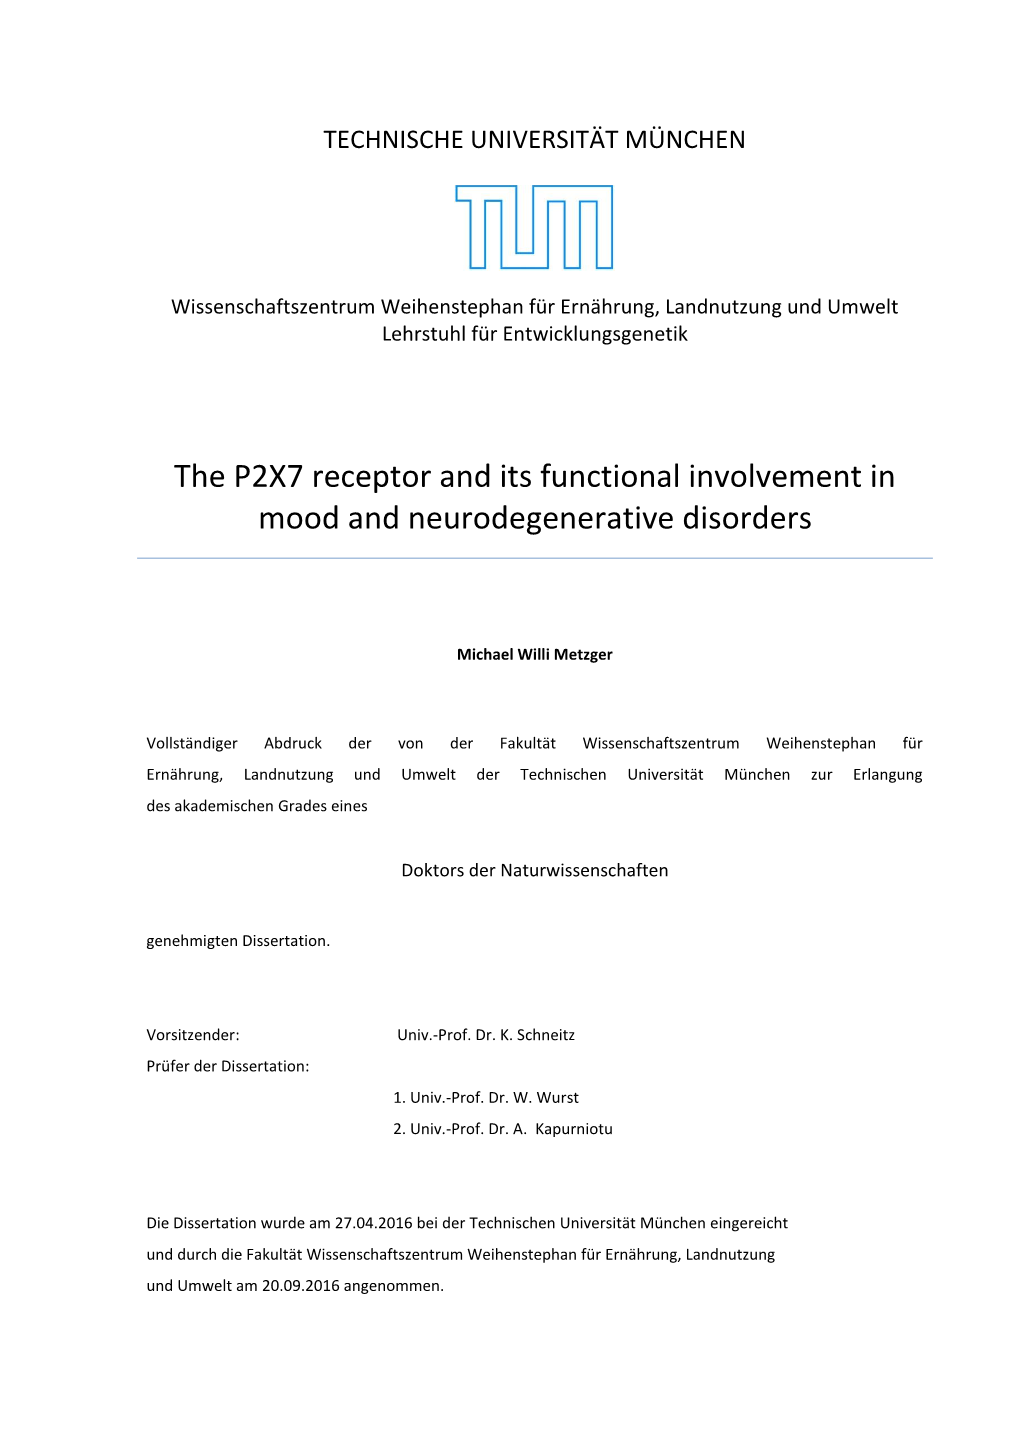 The P2X7 Receptor and Its Functional Involvement in Mood and Neurodegenerative Disorders